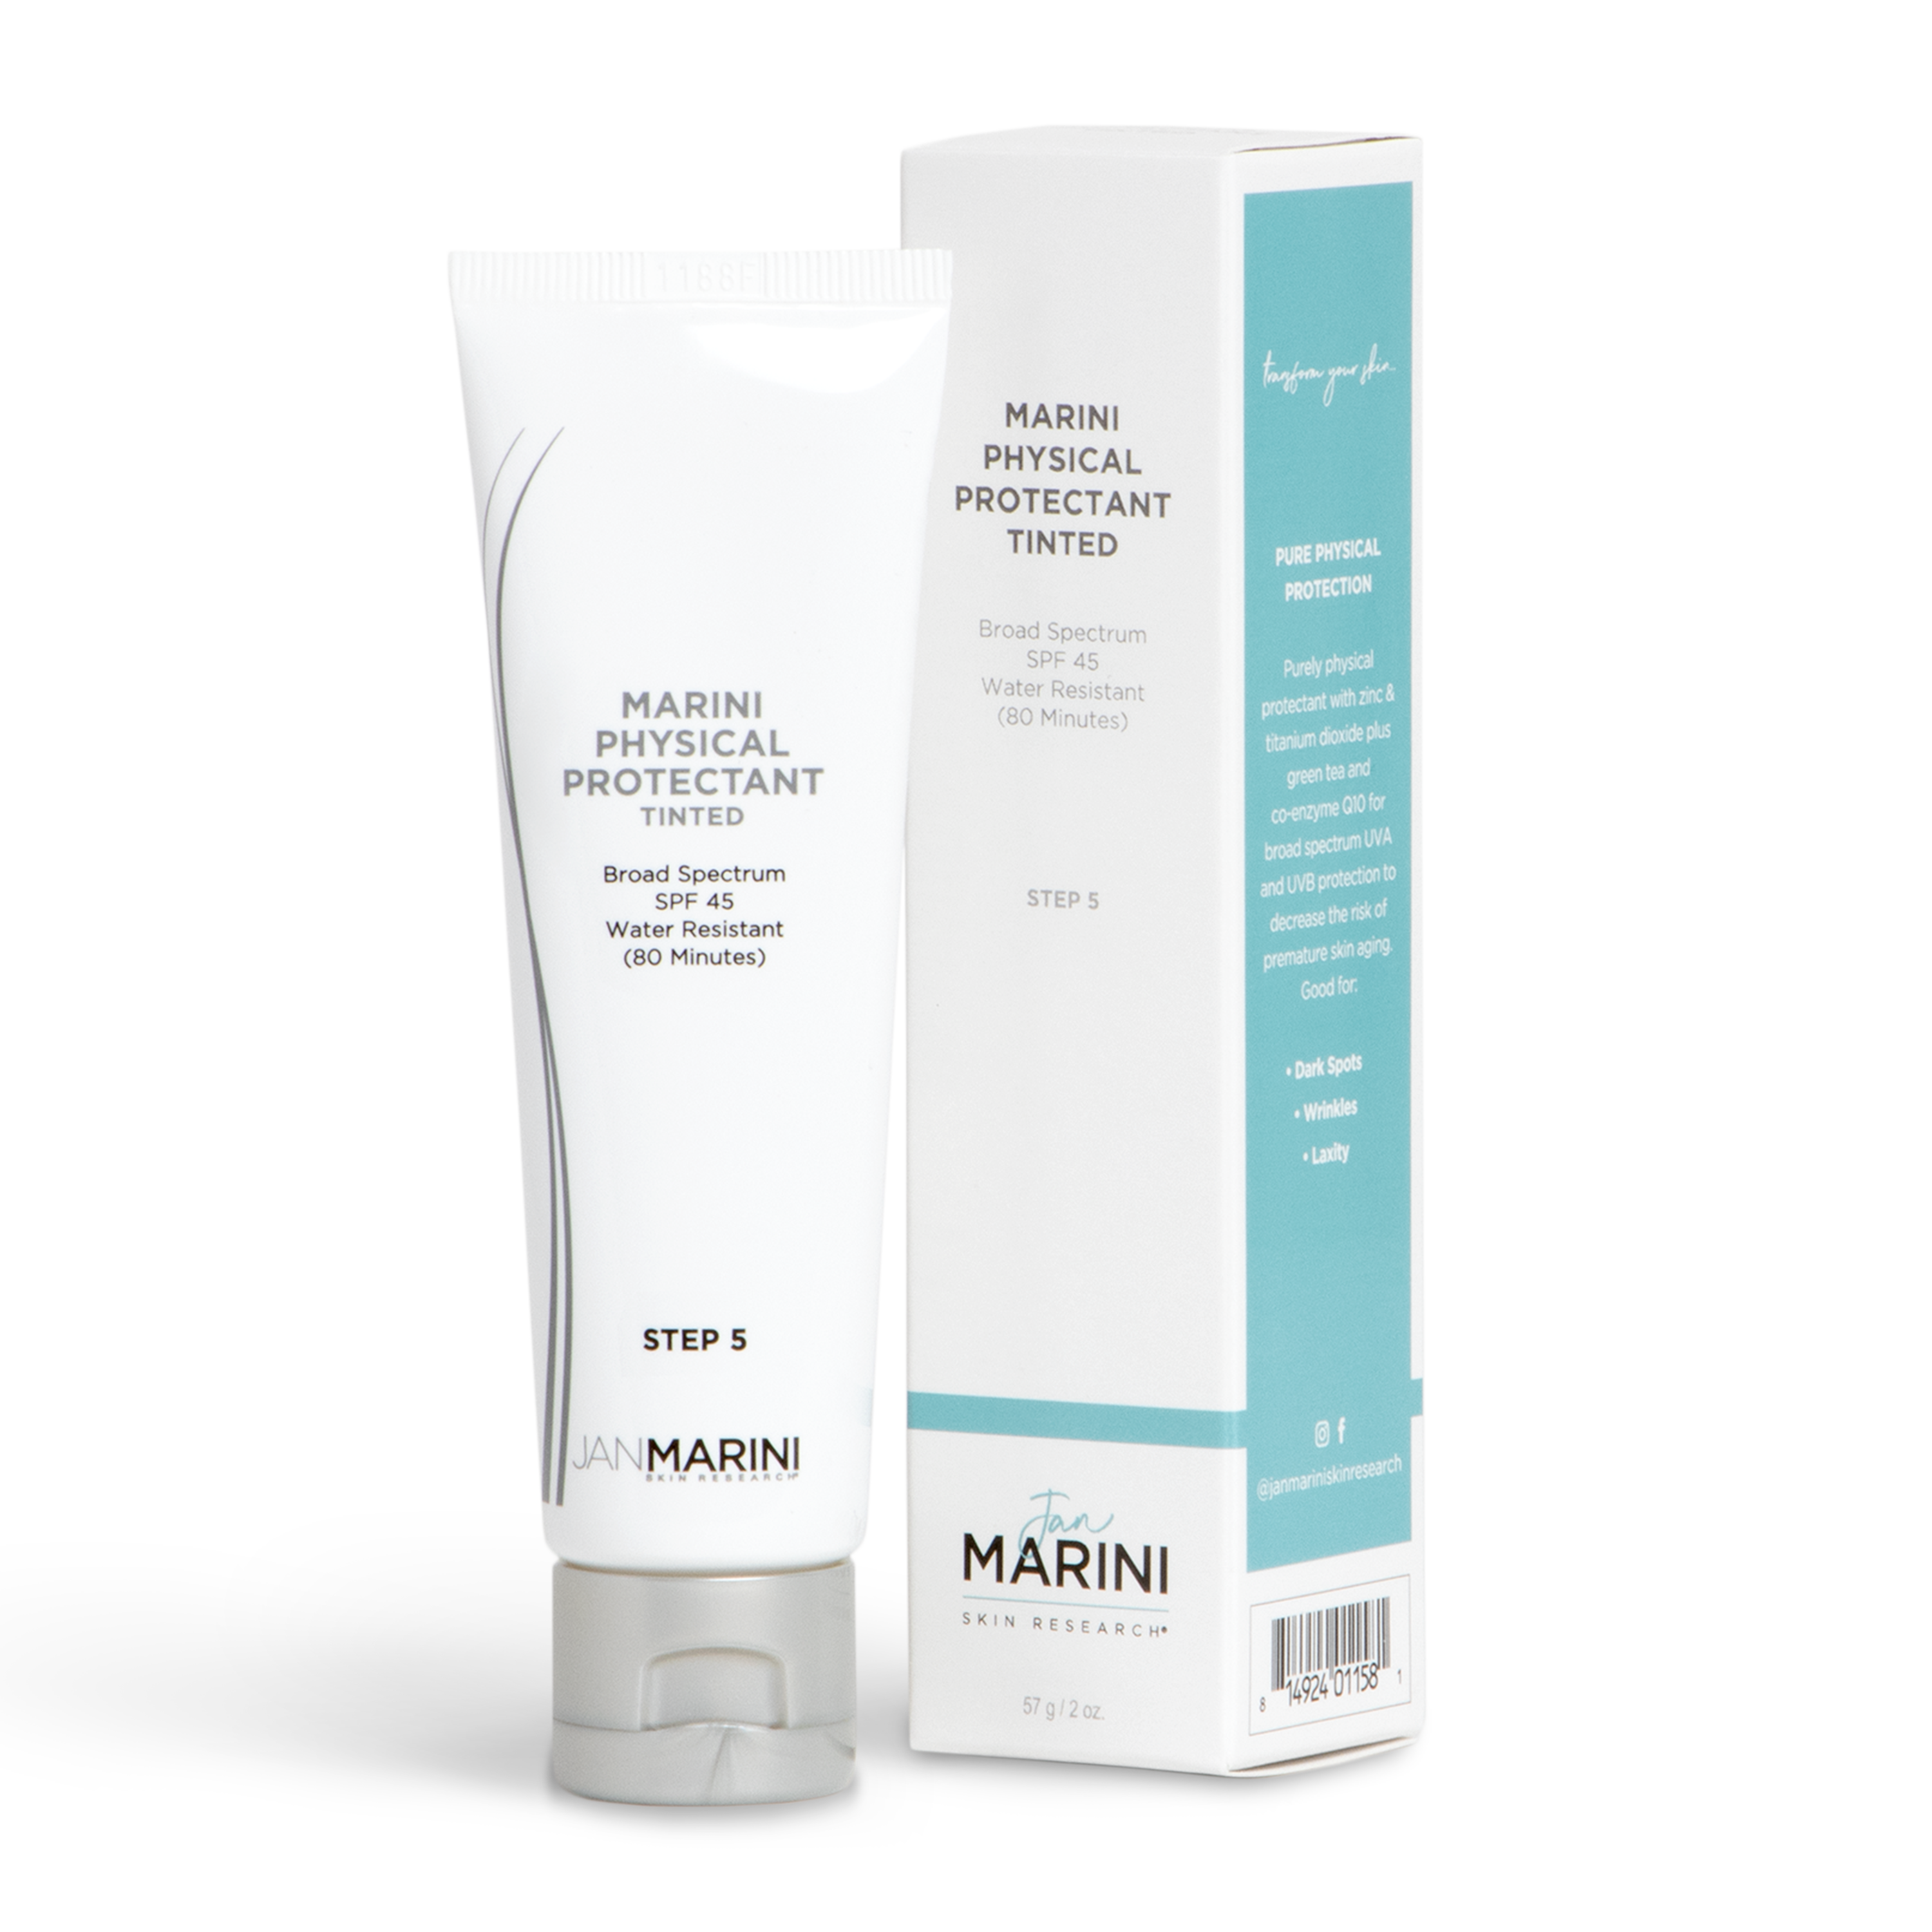 Marini_Physical_Protectant_SPF45_View_A_HiRes